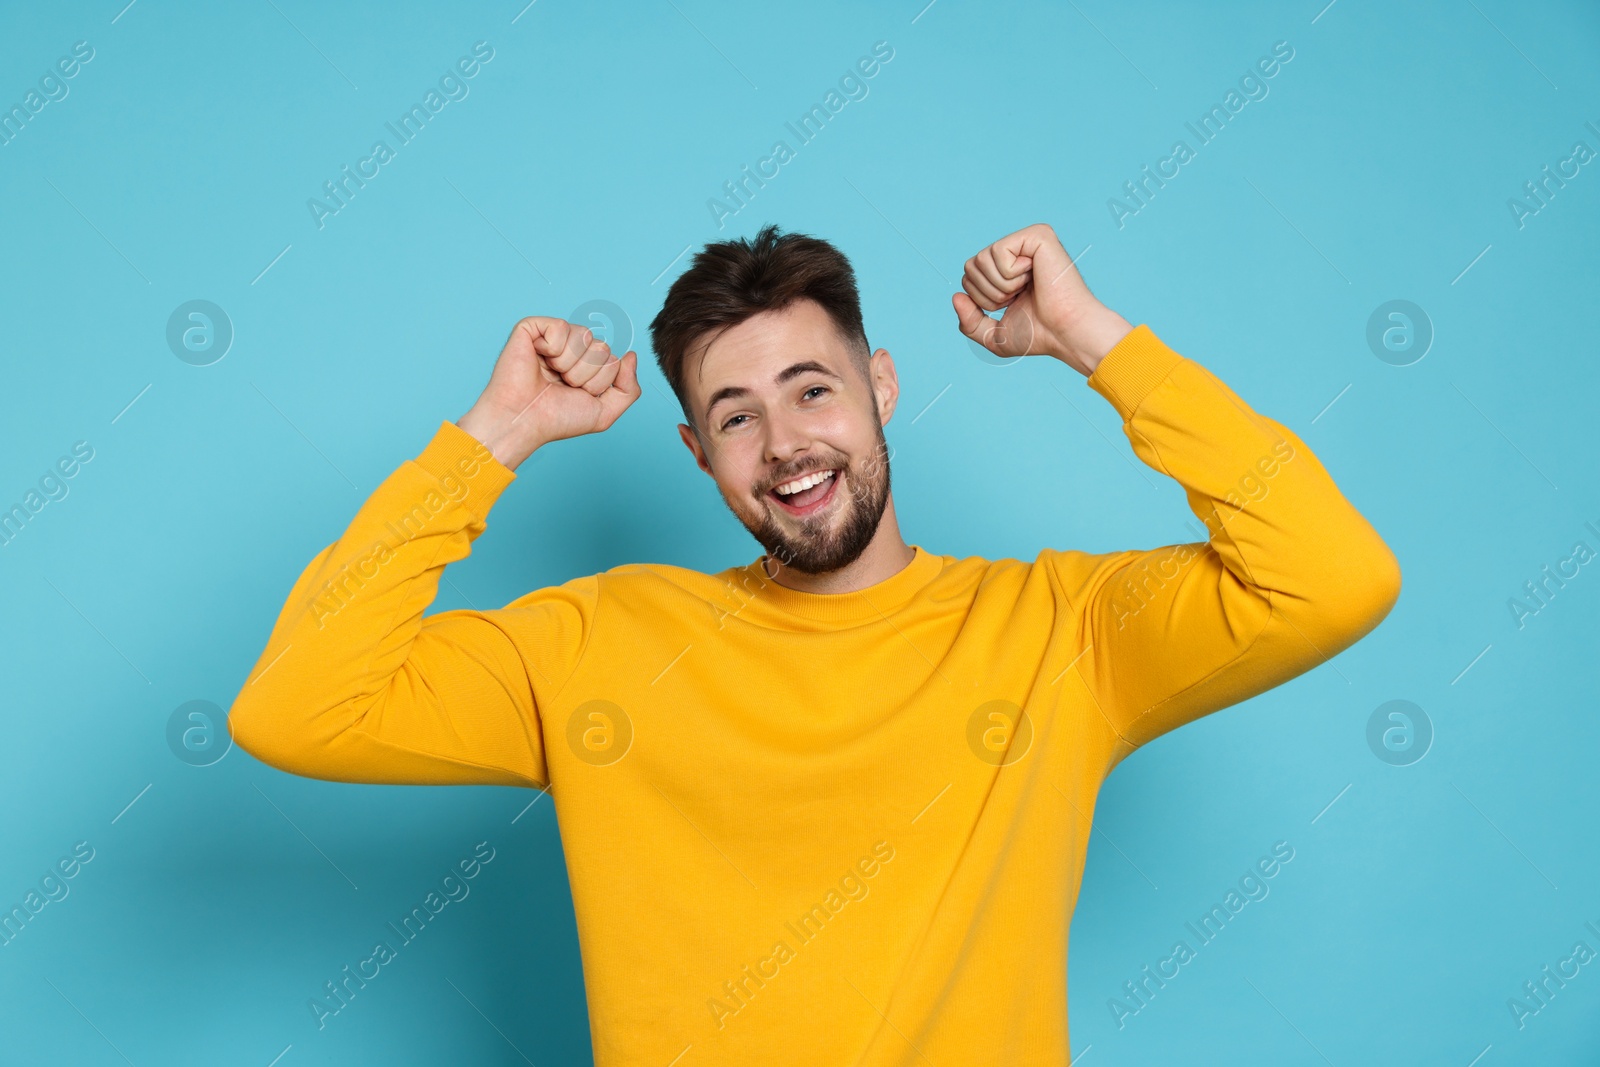 Photo of Excited man in yellow sweatshirt celebrating victory on light blue background